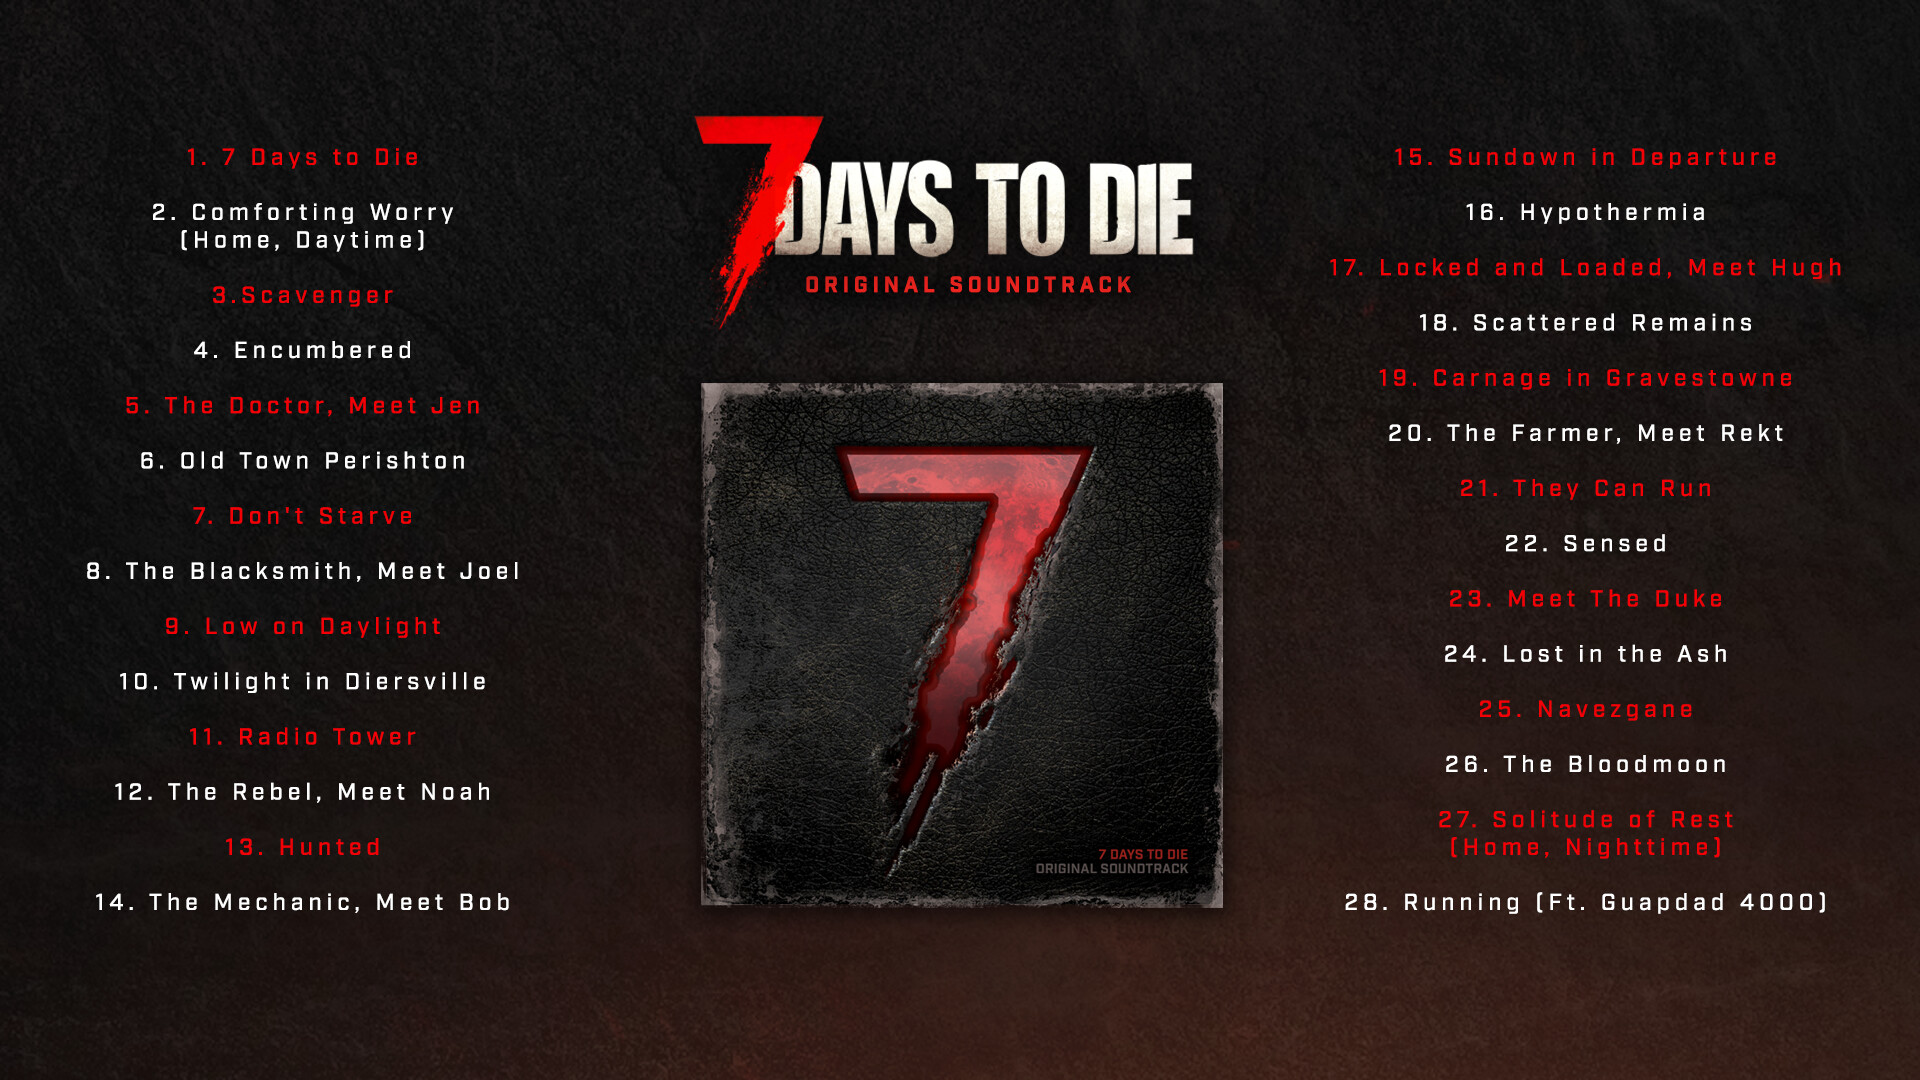 7 Days to Die - Soundtrack Featured Screenshot #1